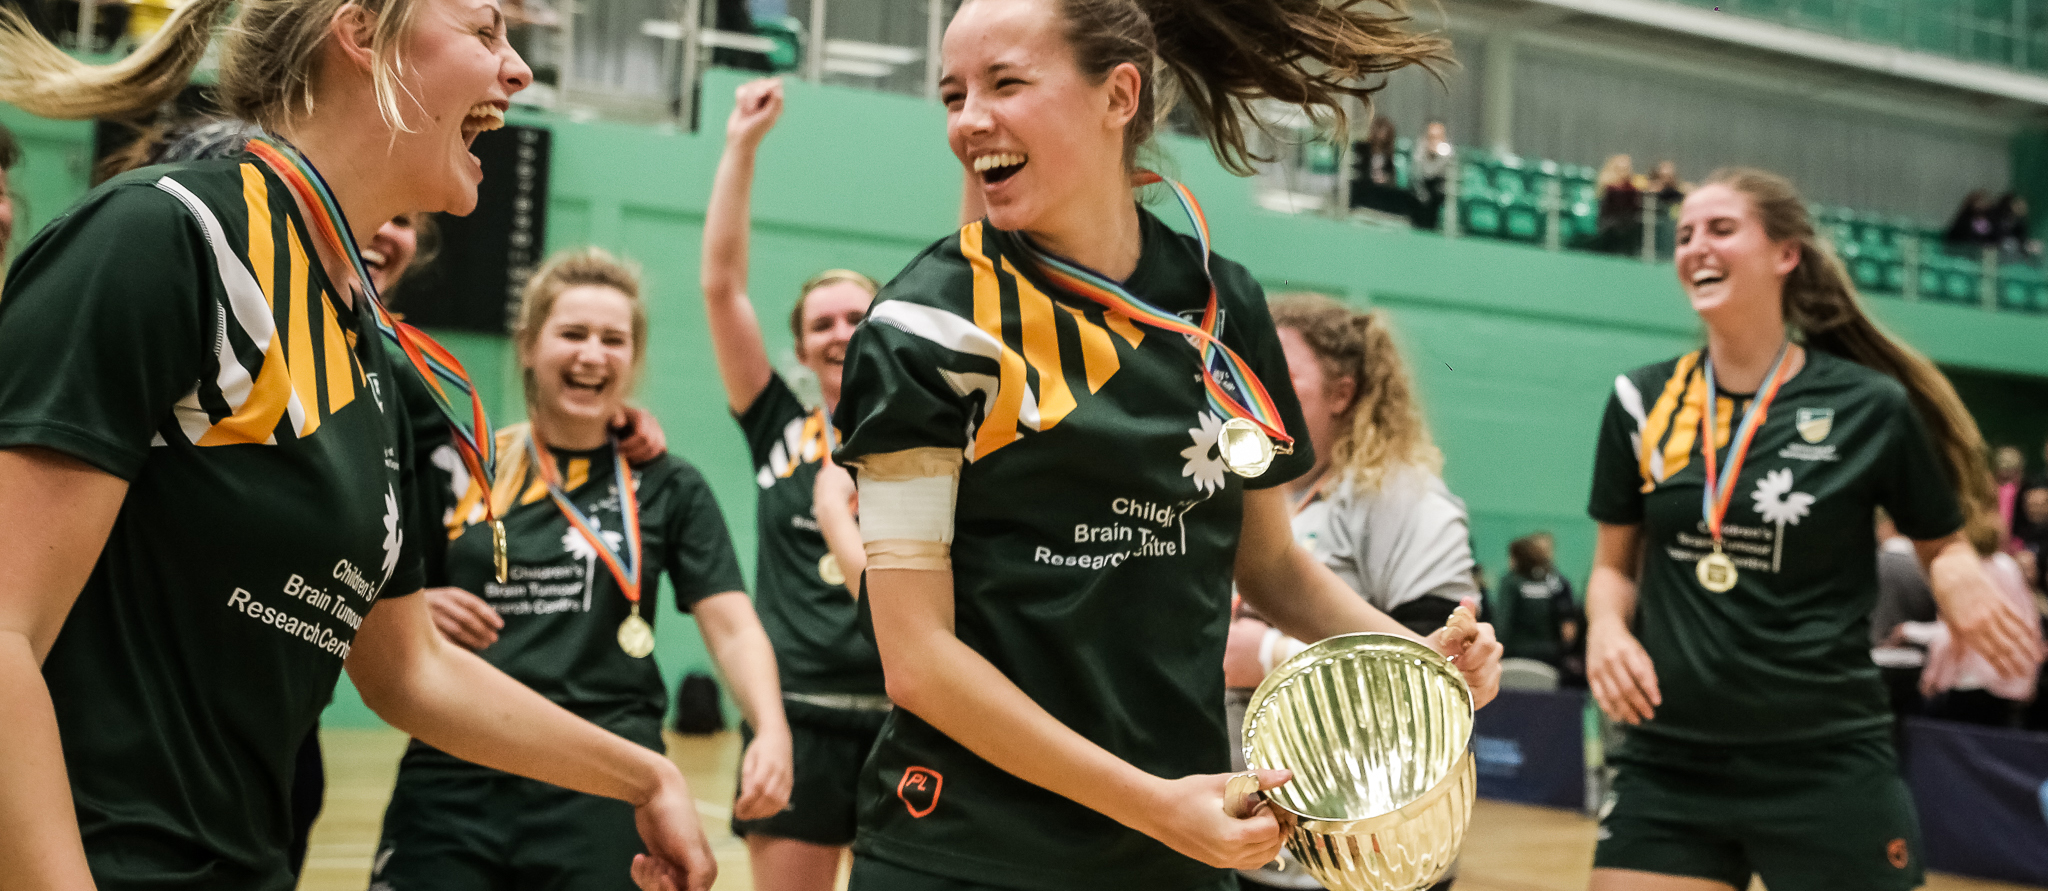 UoN win the Nottingham Varsity Series for a sixth year running Campus